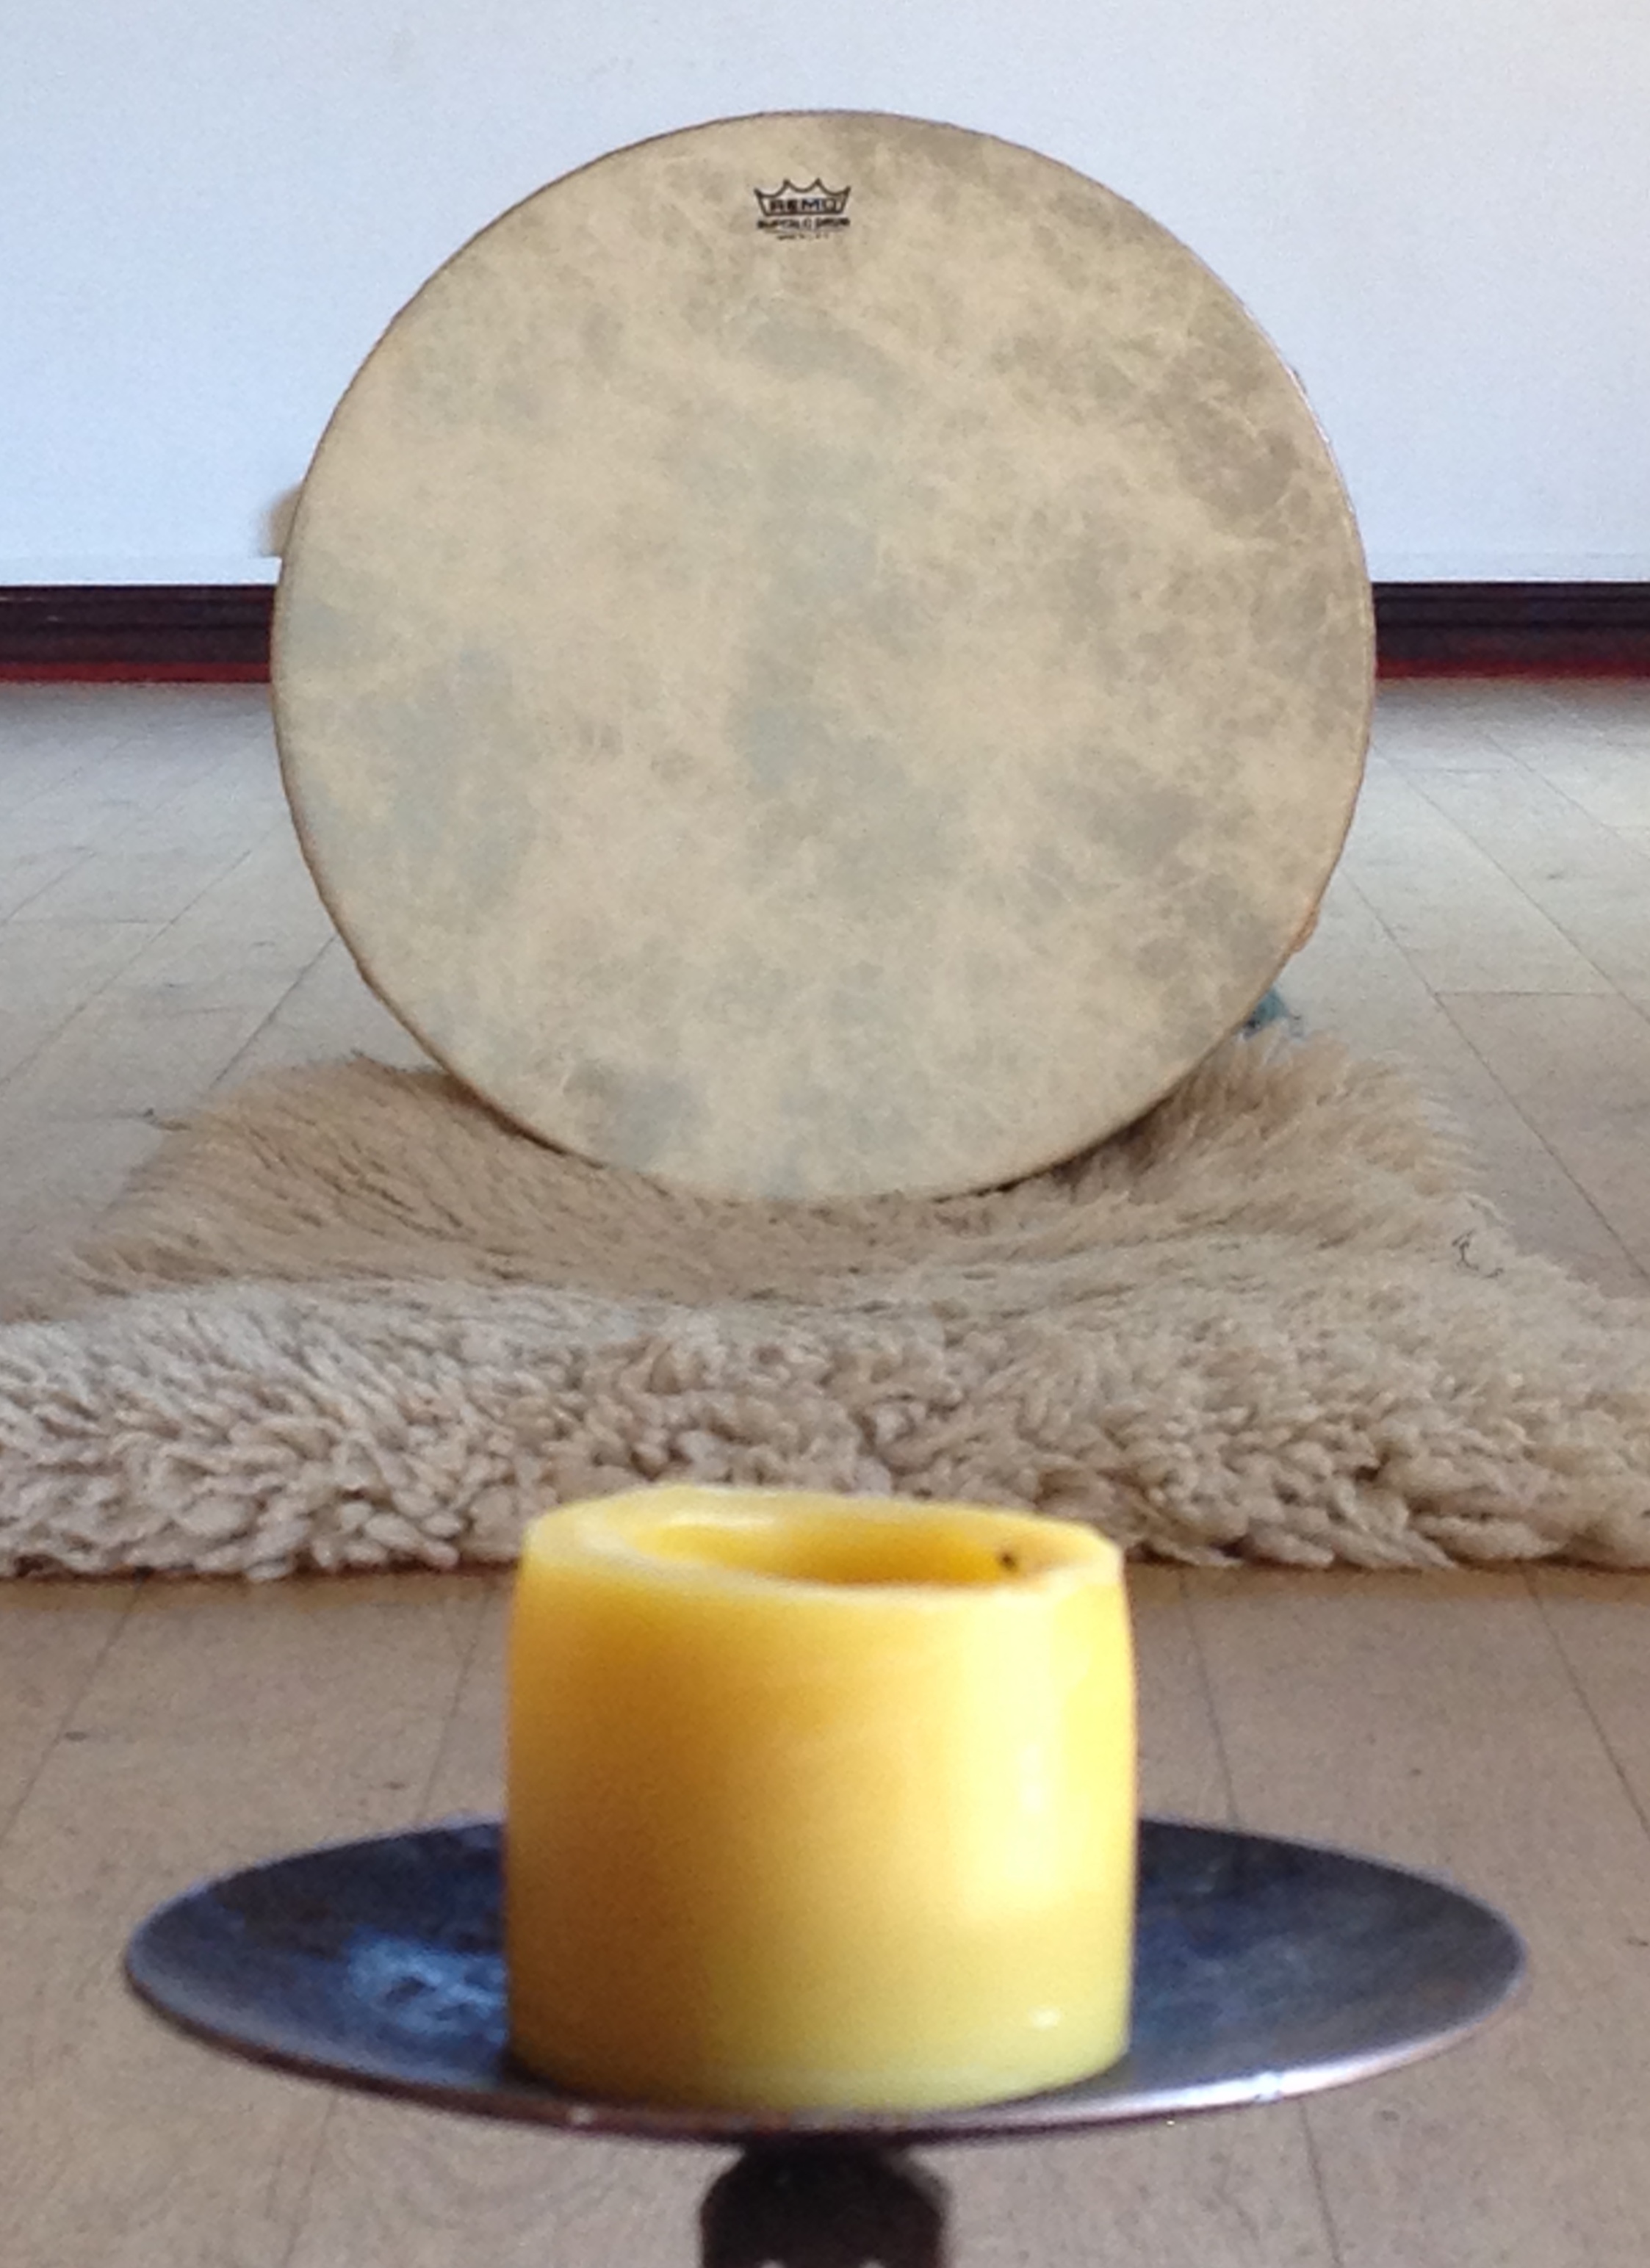 Shaman's drum & candle